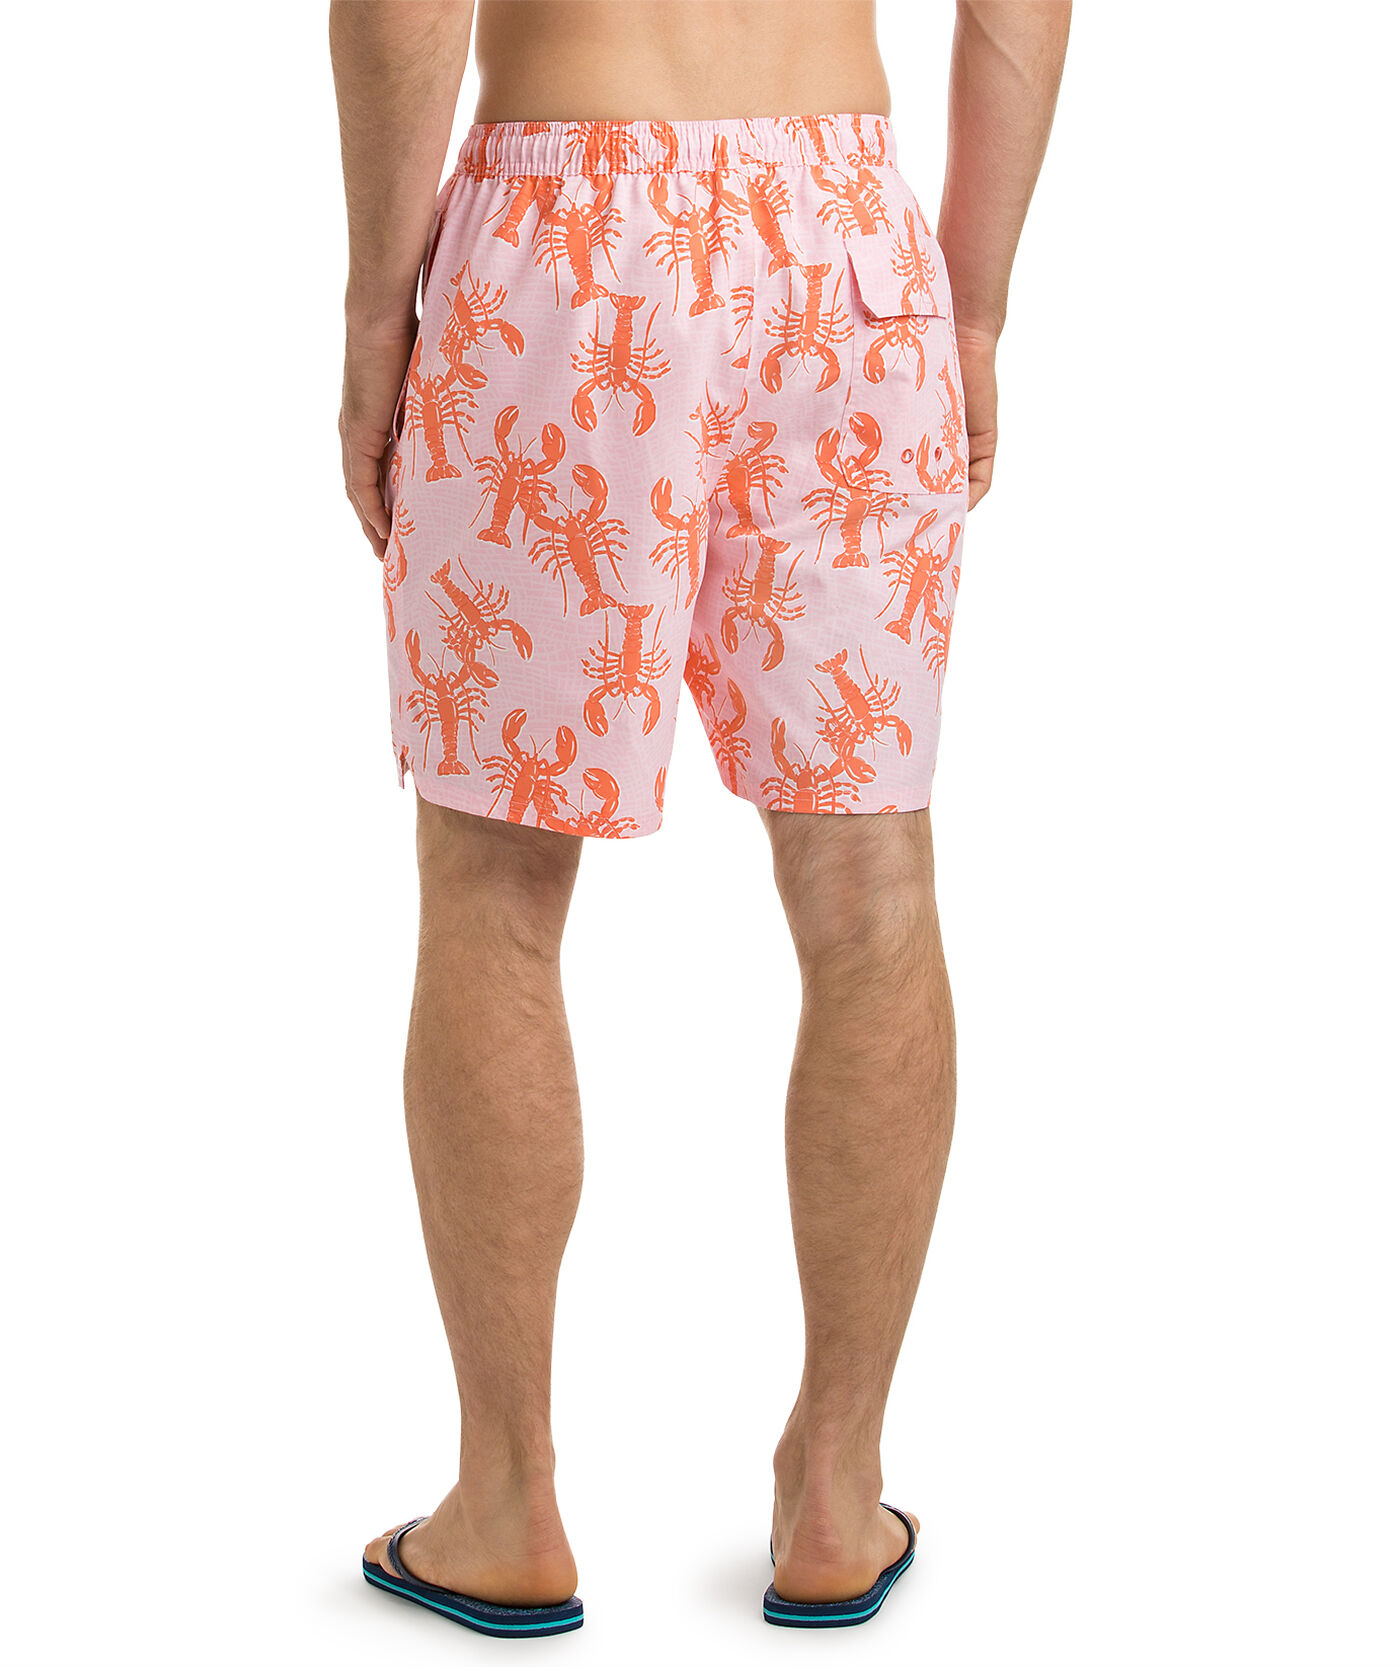 Shop Lobster Toss Chappy Trunks at vineyard vines